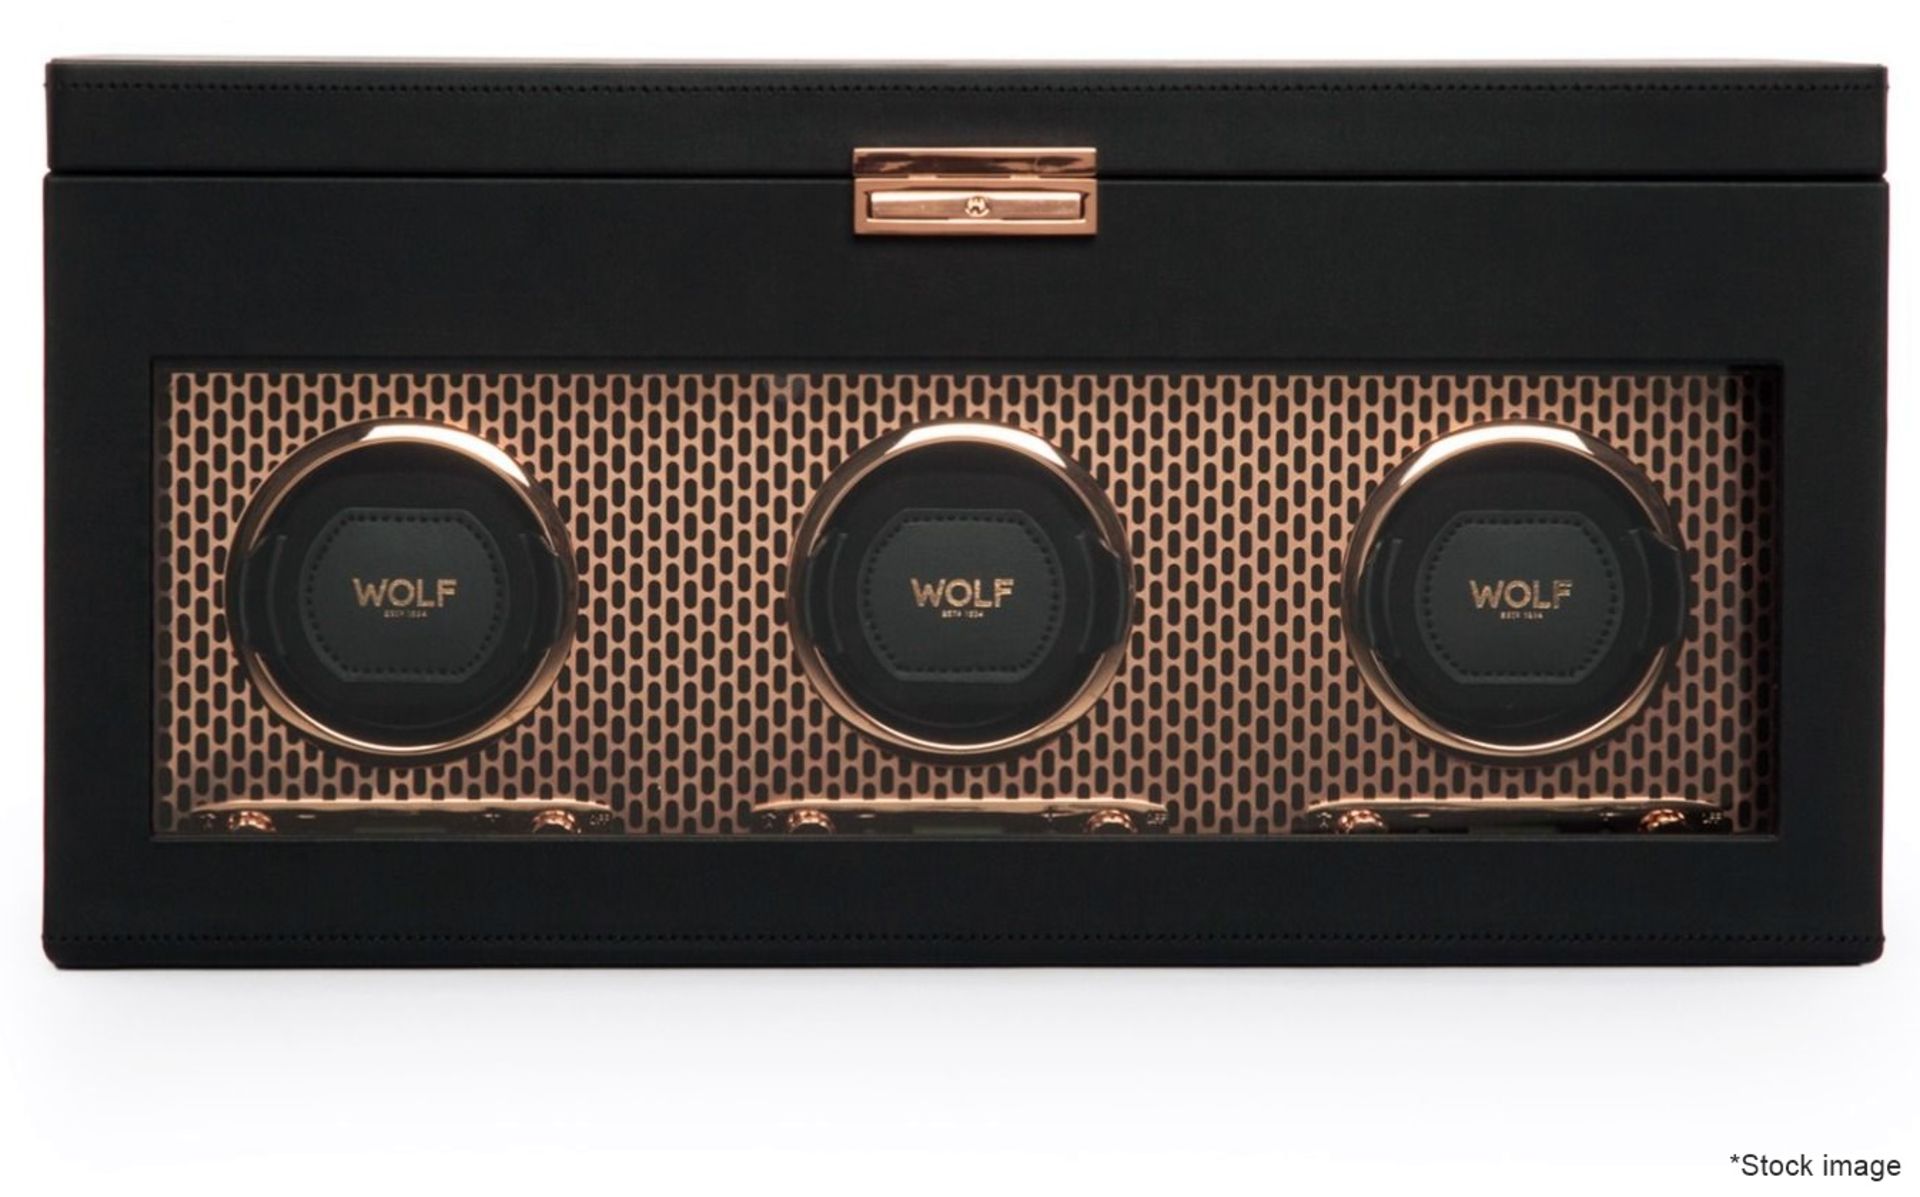 1 x WOLF 'Axis' Luxury Triple Watch Winder With Storage - Original Price £1,809 - Unused Boxed Stock - Image 20 of 32